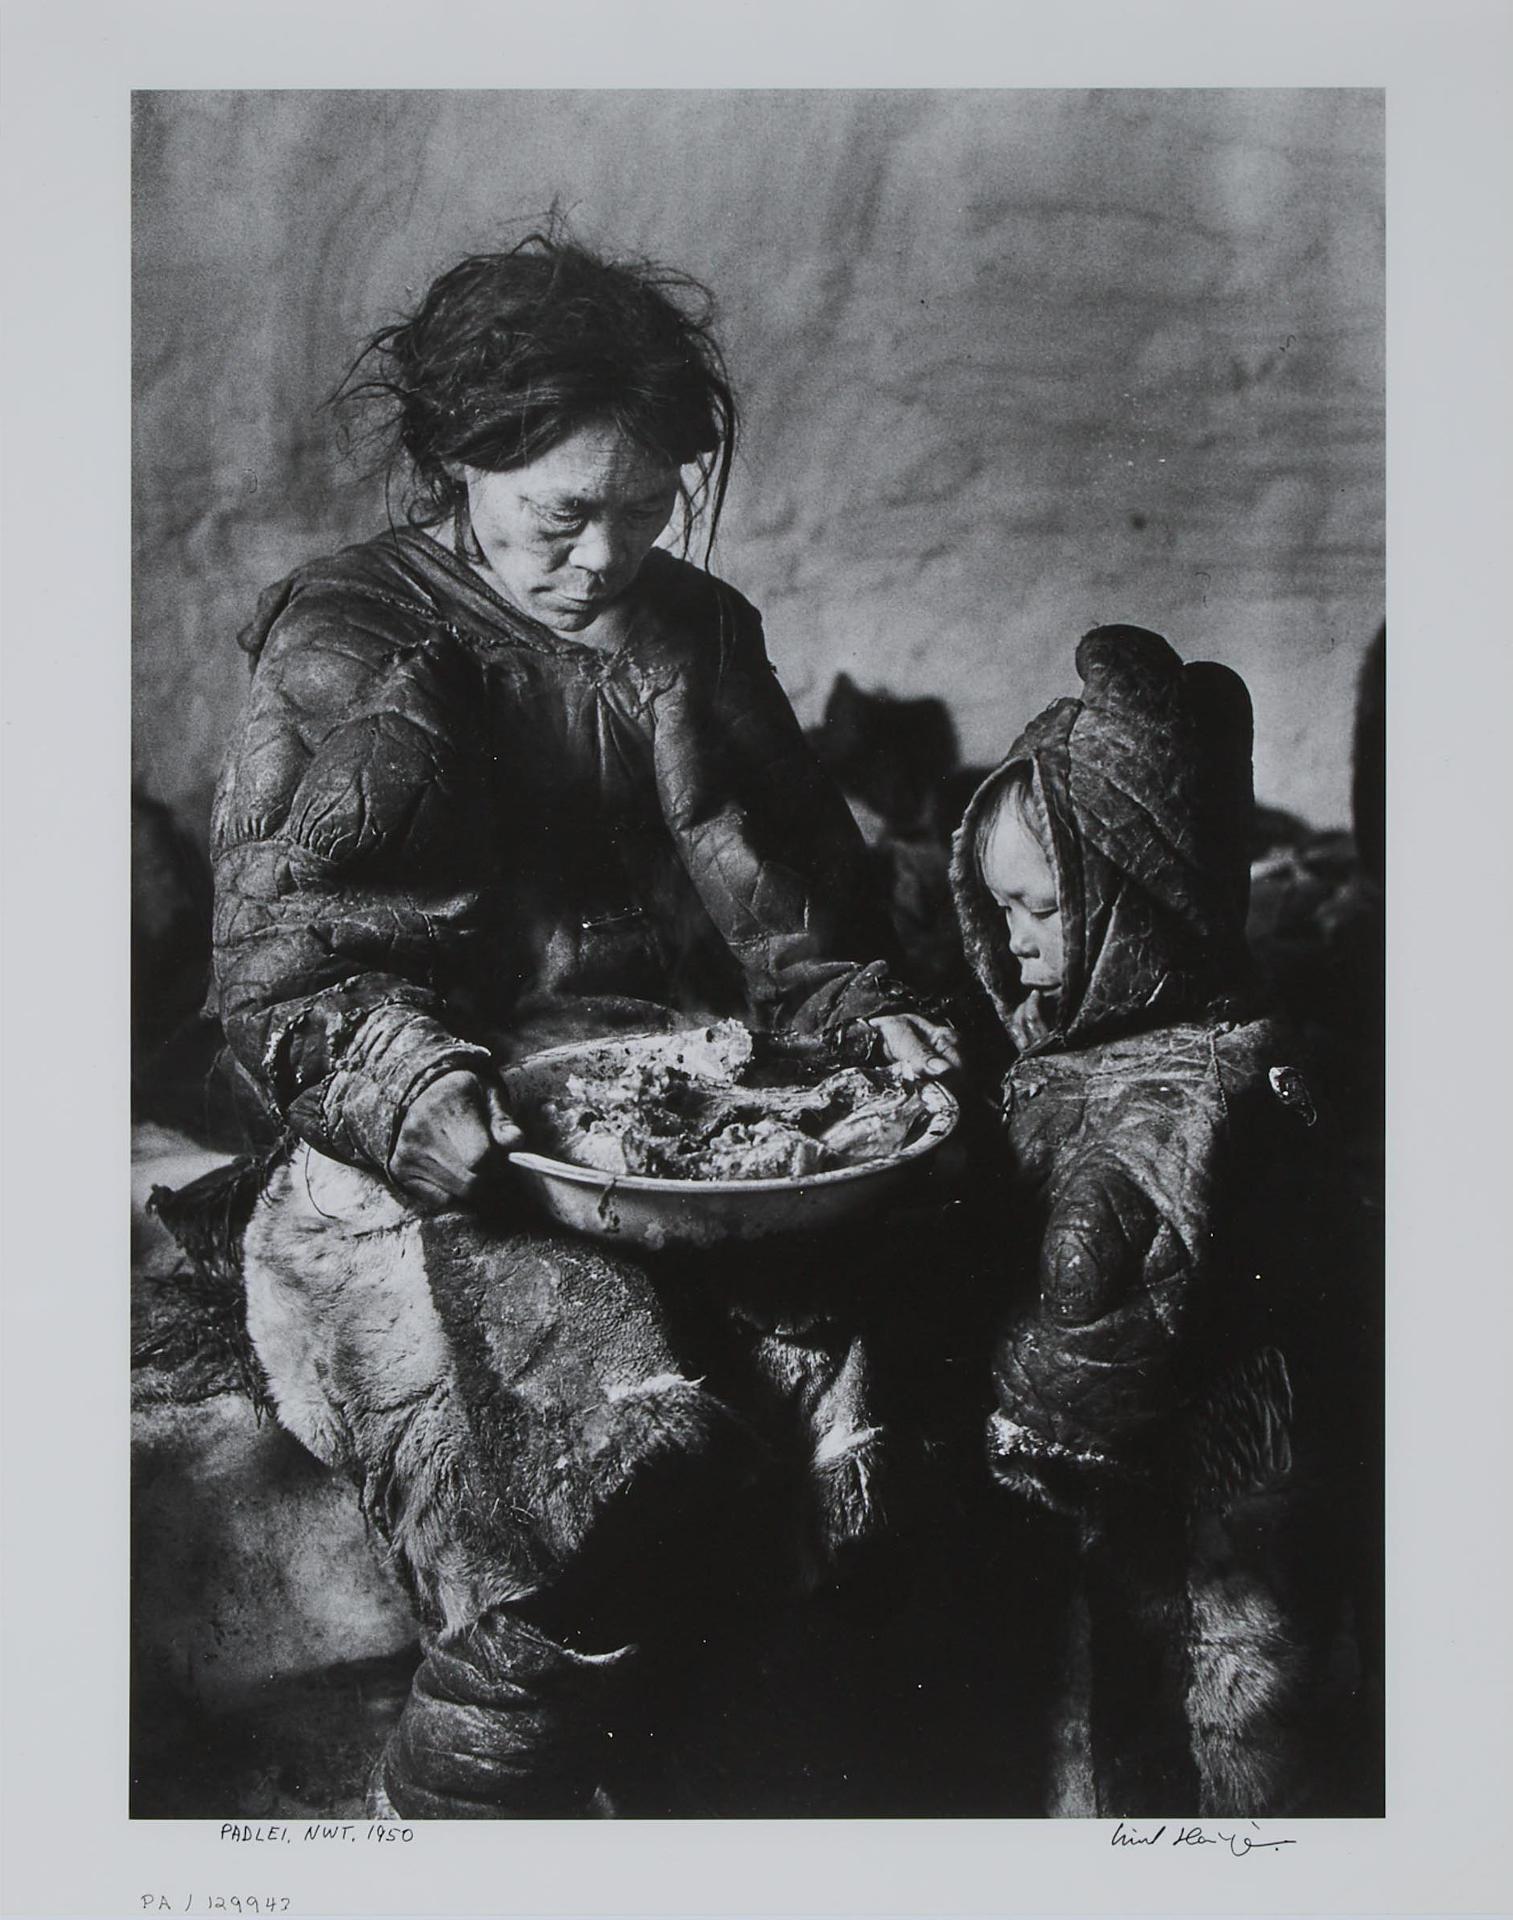 Richard Harrington (1911-2005) - Padlei, Nwt. 1950 [woman And Child With A Remnants Meal]